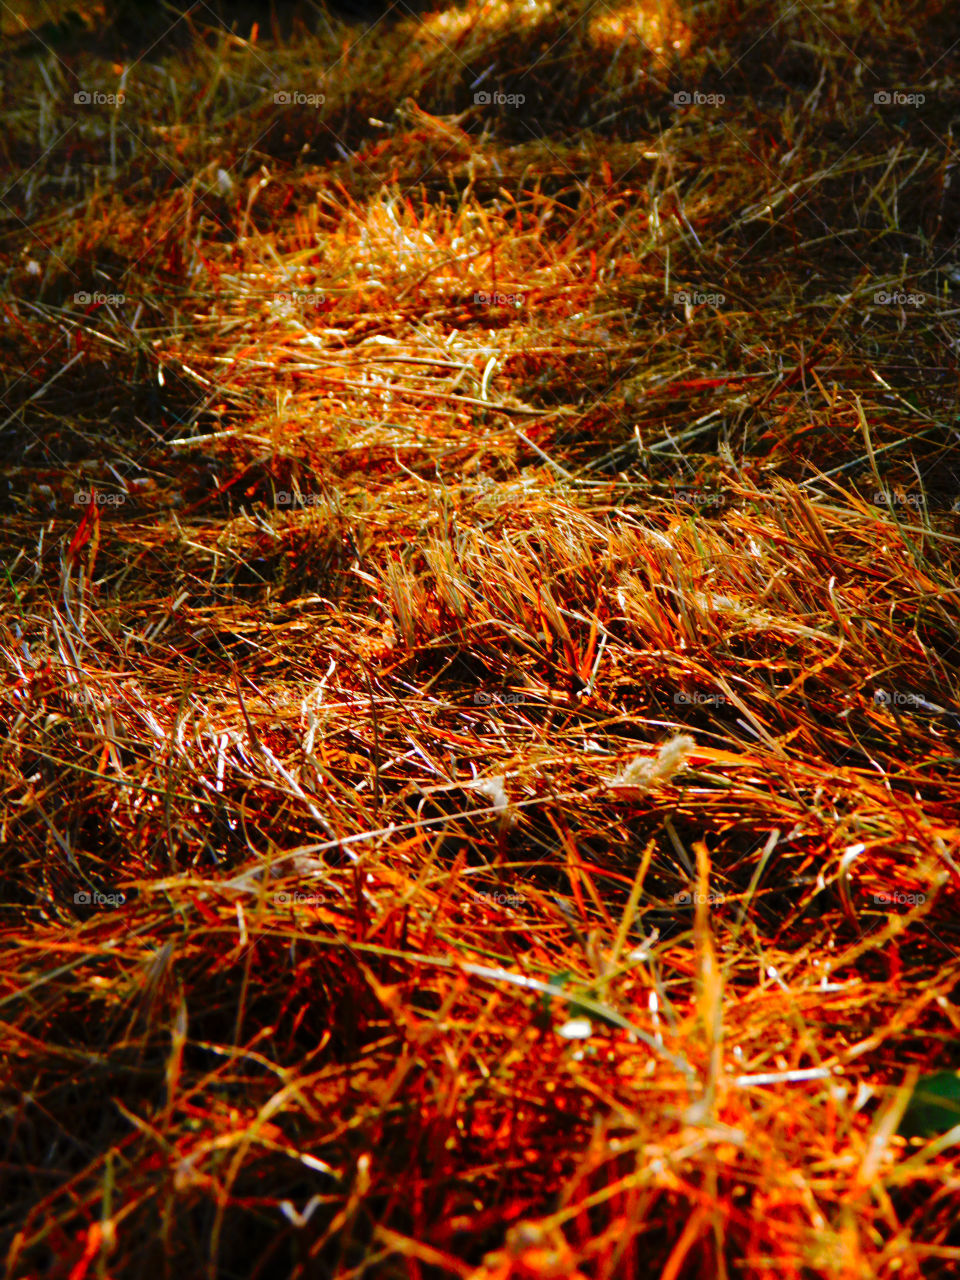 Parched grass illuminated by the hot afternoon sun in a Madrid forest in summer.